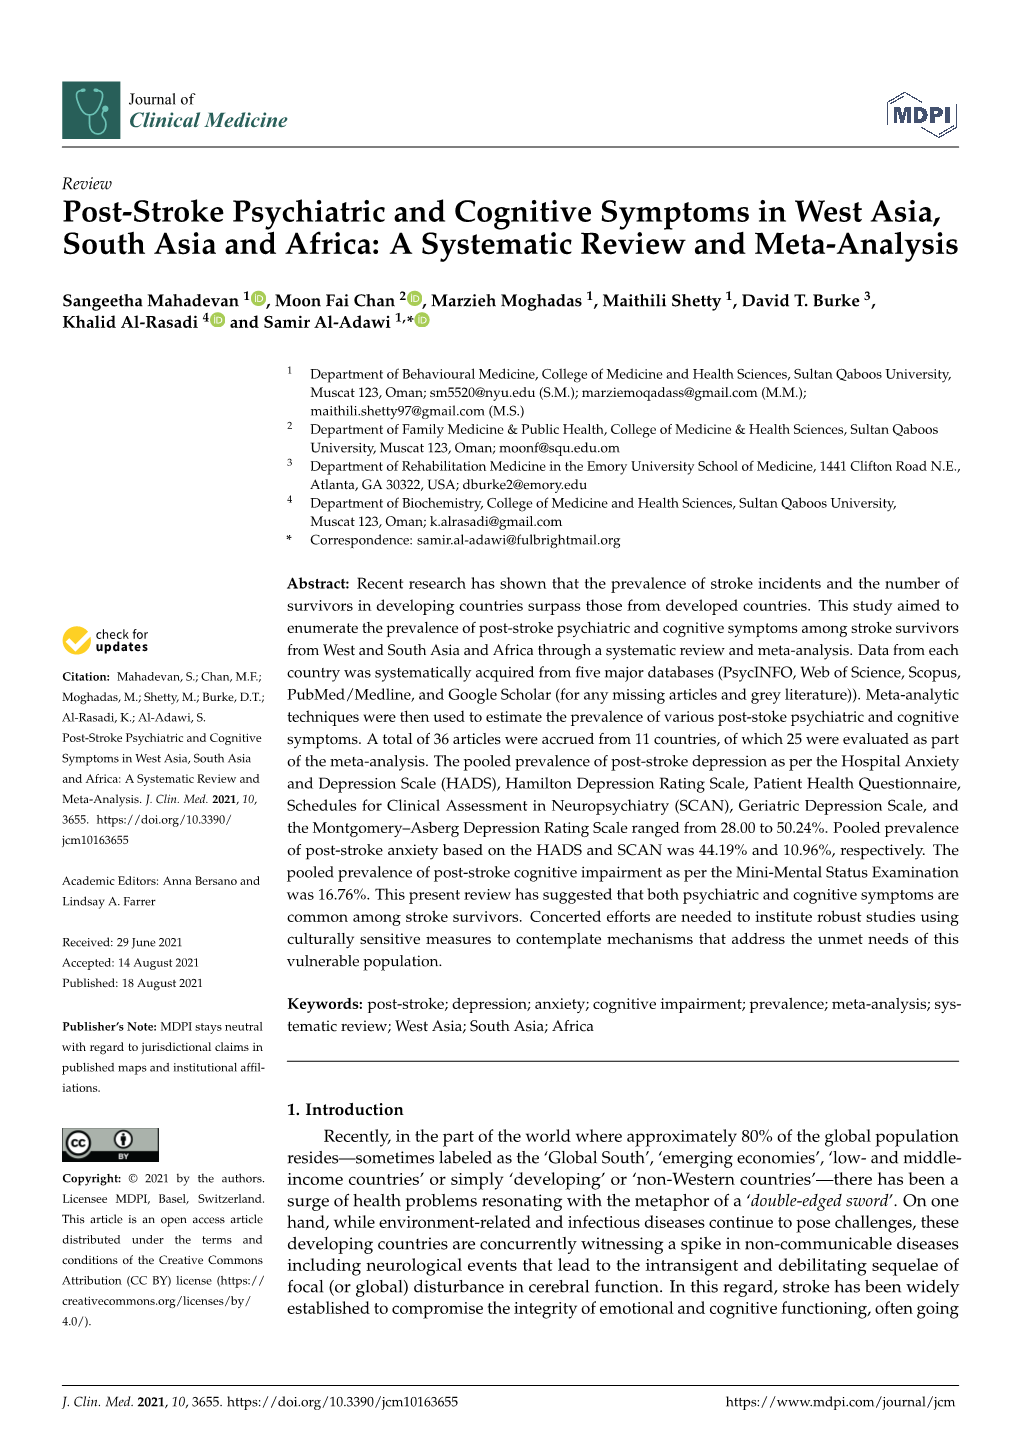 Post-Stroke Psychiatric and Cognitive Symptoms in West Asia, South Asia and Africa: a Systematic Review and Meta-Analysis